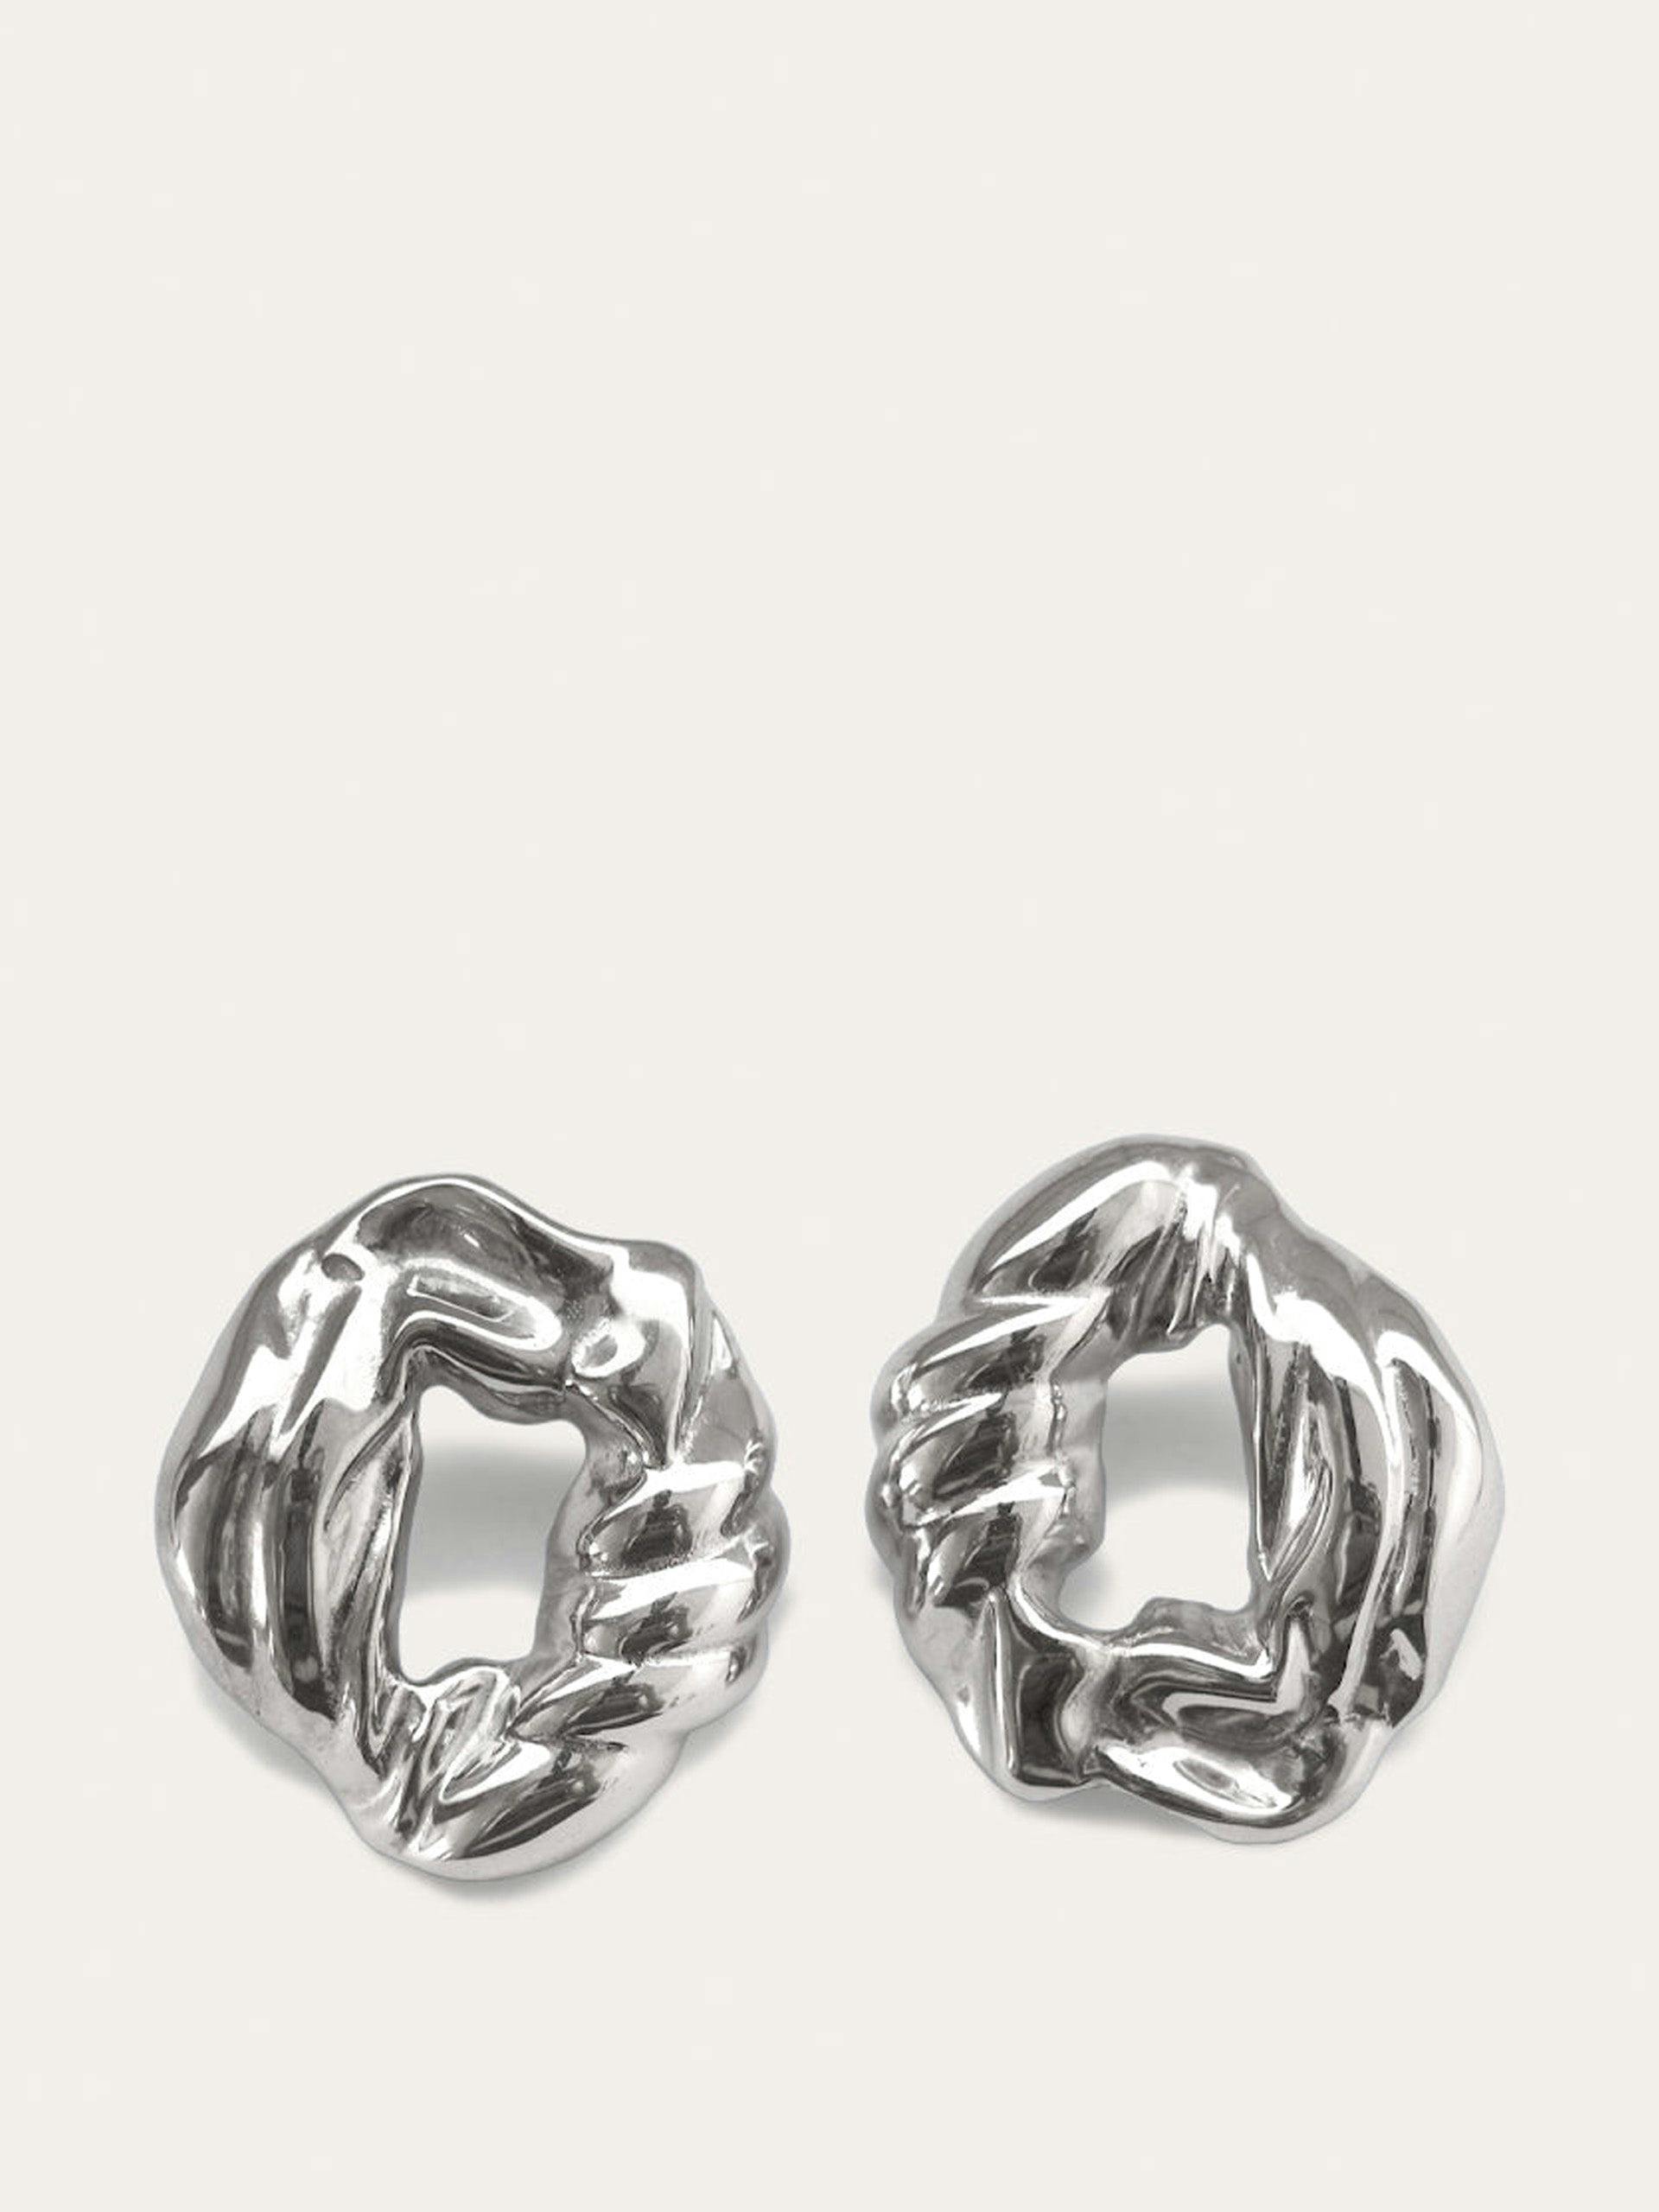 Destination Unknown rhodium plated earrings